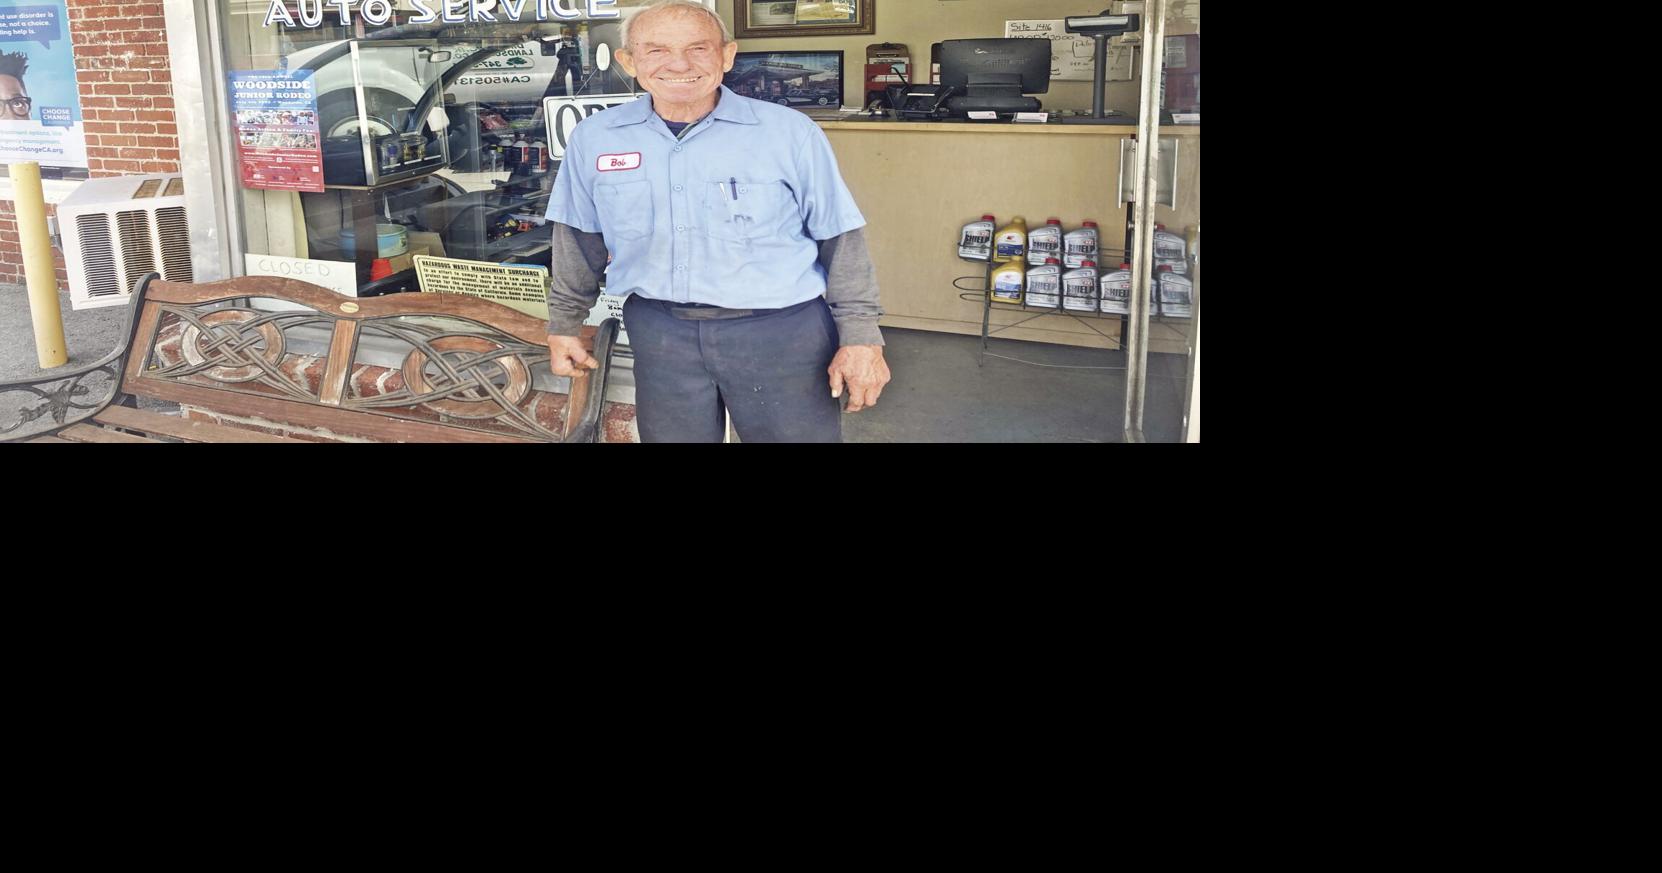 50 years of service for Bob Reed’s Auto Service of San Mateo | Local News